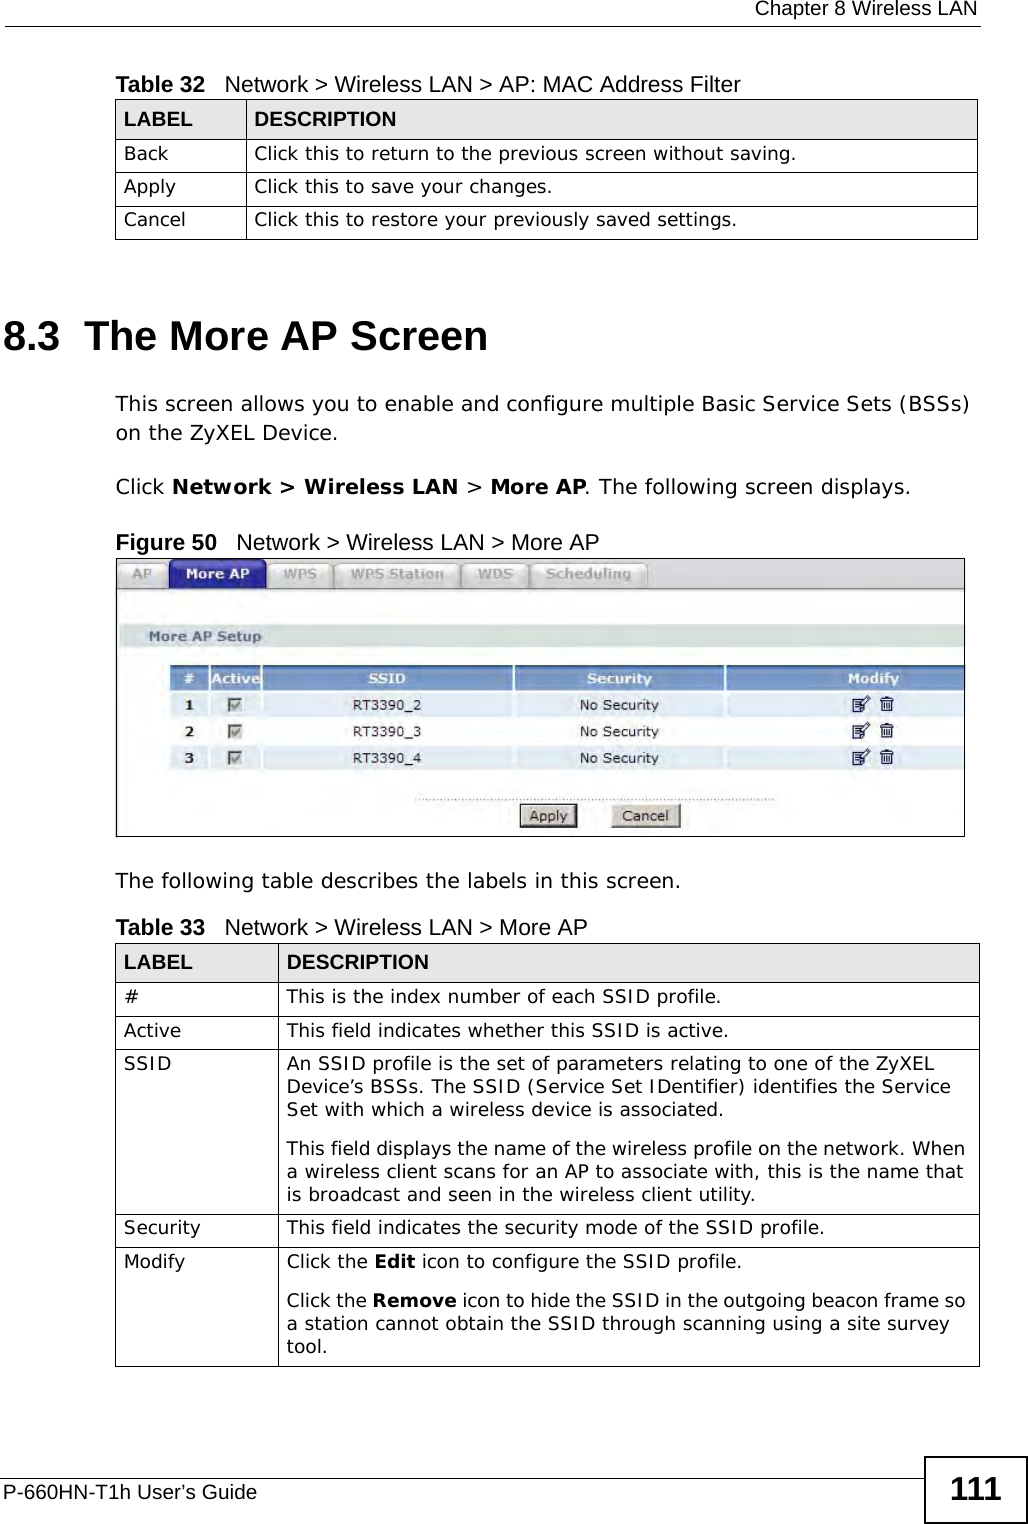  Chapter 8 Wireless LANP-660HN-T1h User’s Guide 1118.3  The More AP ScreenThis screen allows you to enable and configure multiple Basic Service Sets (BSSs) on the ZyXEL Device.Click Network &gt; Wireless LAN &gt; More AP. The following screen displays.Figure 50   Network &gt; Wireless LAN &gt; More APThe following table describes the labels in this screen.Back Click this to return to the previous screen without saving.Apply Click this to save your changes.Cancel Click this to restore your previously saved settings.Table 32   Network &gt; Wireless LAN &gt; AP: MAC Address FilterLABEL DESCRIPTIONTable 33   Network &gt; Wireless LAN &gt; More APLABEL DESCRIPTION# This is the index number of each SSID profile. Active This field indicates whether this SSID is active. SSID An SSID profile is the set of parameters relating to one of the ZyXEL Device’s BSSs. The SSID (Service Set IDentifier) identifies the Service Set with which a wireless device is associated. This field displays the name of the wireless profile on the network. When a wireless client scans for an AP to associate with, this is the name that is broadcast and seen in the wireless client utility.Security This field indicates the security mode of the SSID profile.Modify Click the Edit icon to configure the SSID profile.Click the Remove icon to hide the SSID in the outgoing beacon frame so a station cannot obtain the SSID through scanning using a site survey tool.